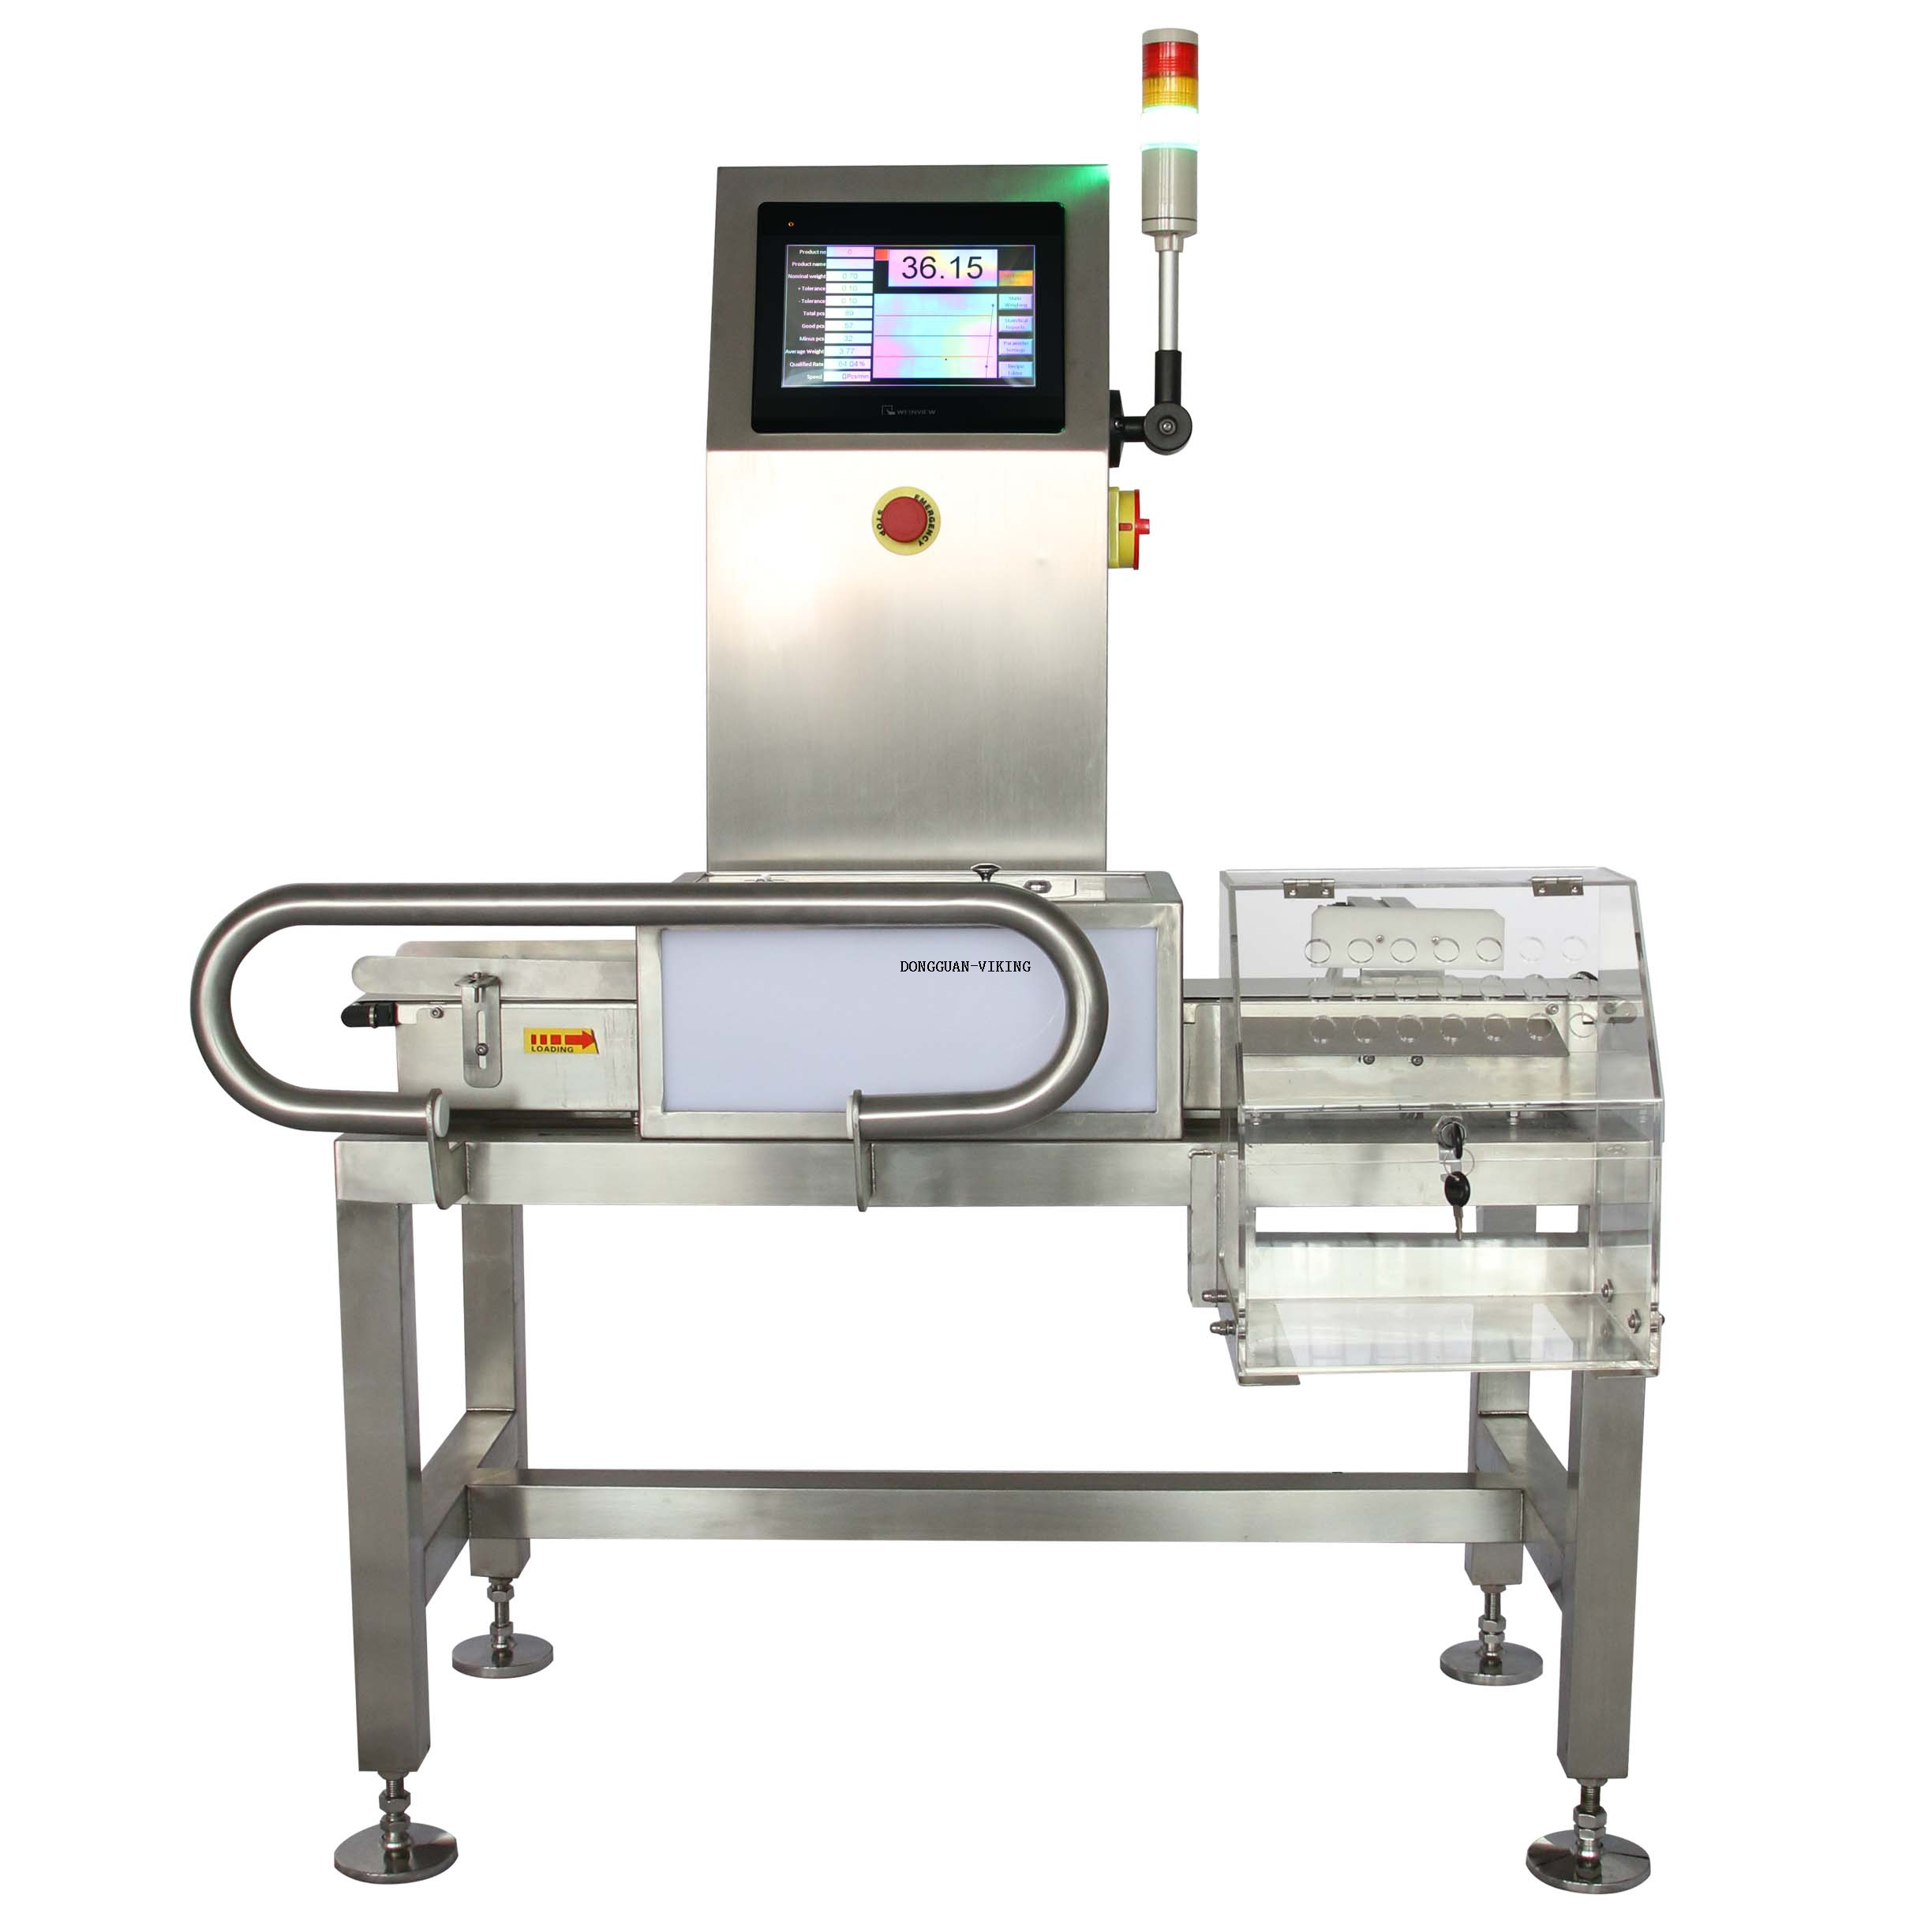 High accuracy checkweigher for small products